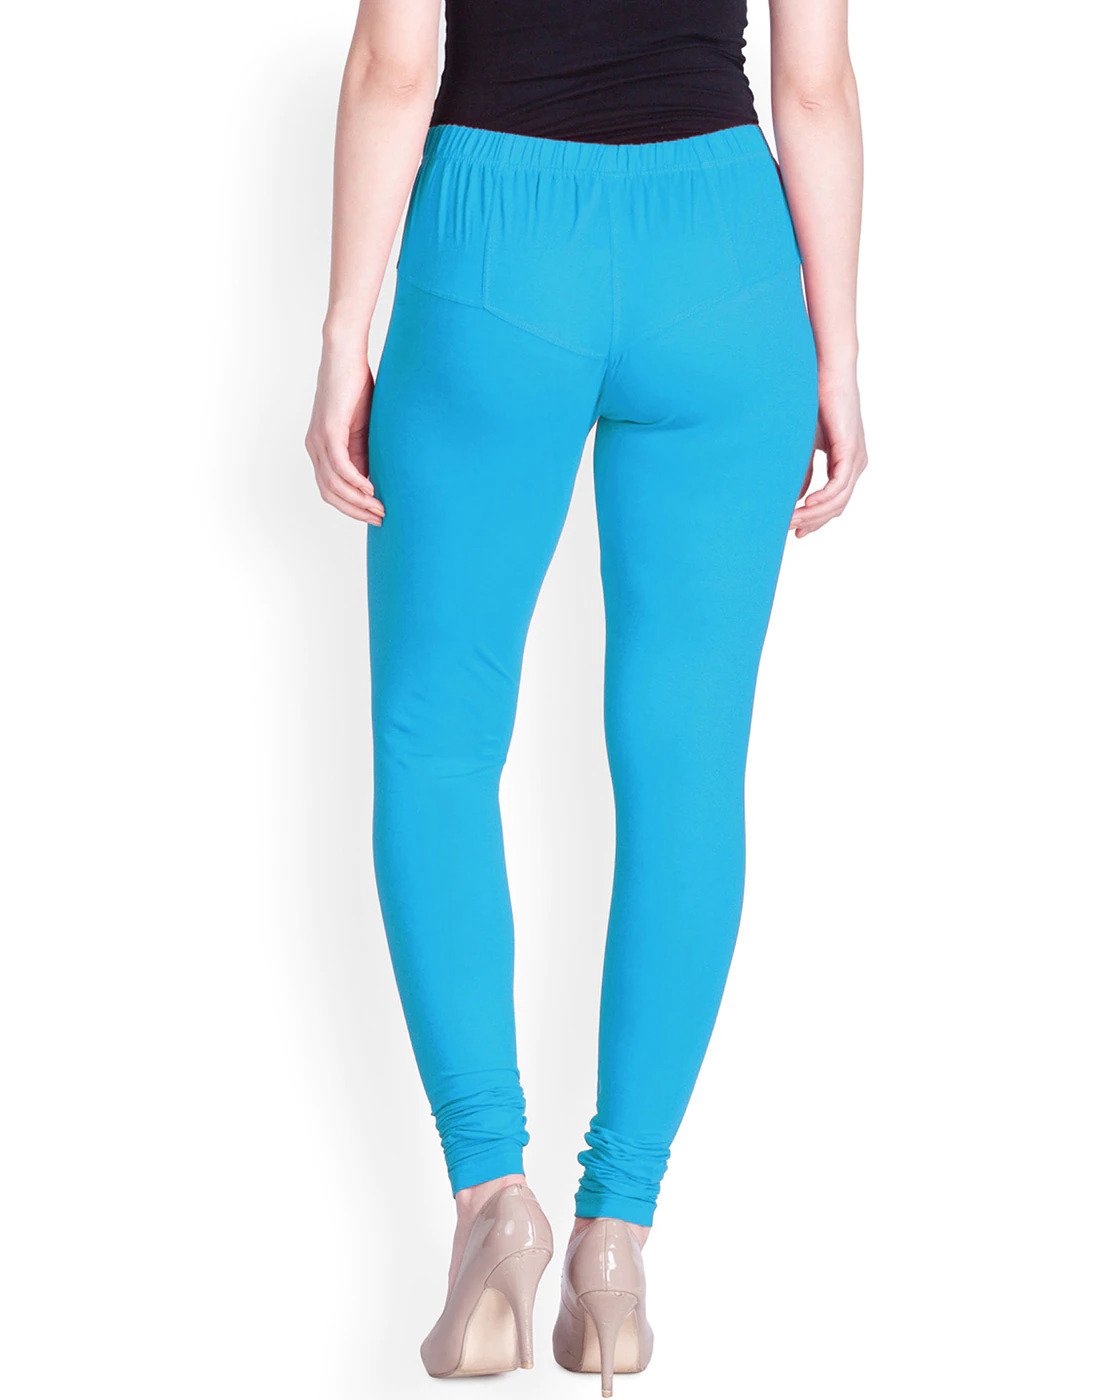 Lux Lyra Cotton Lycra Pack of 2 Leggings Price in India - Buy Lux Lyra  Cotton Lycra Pack of 2 Leggings Online at Snapdeal